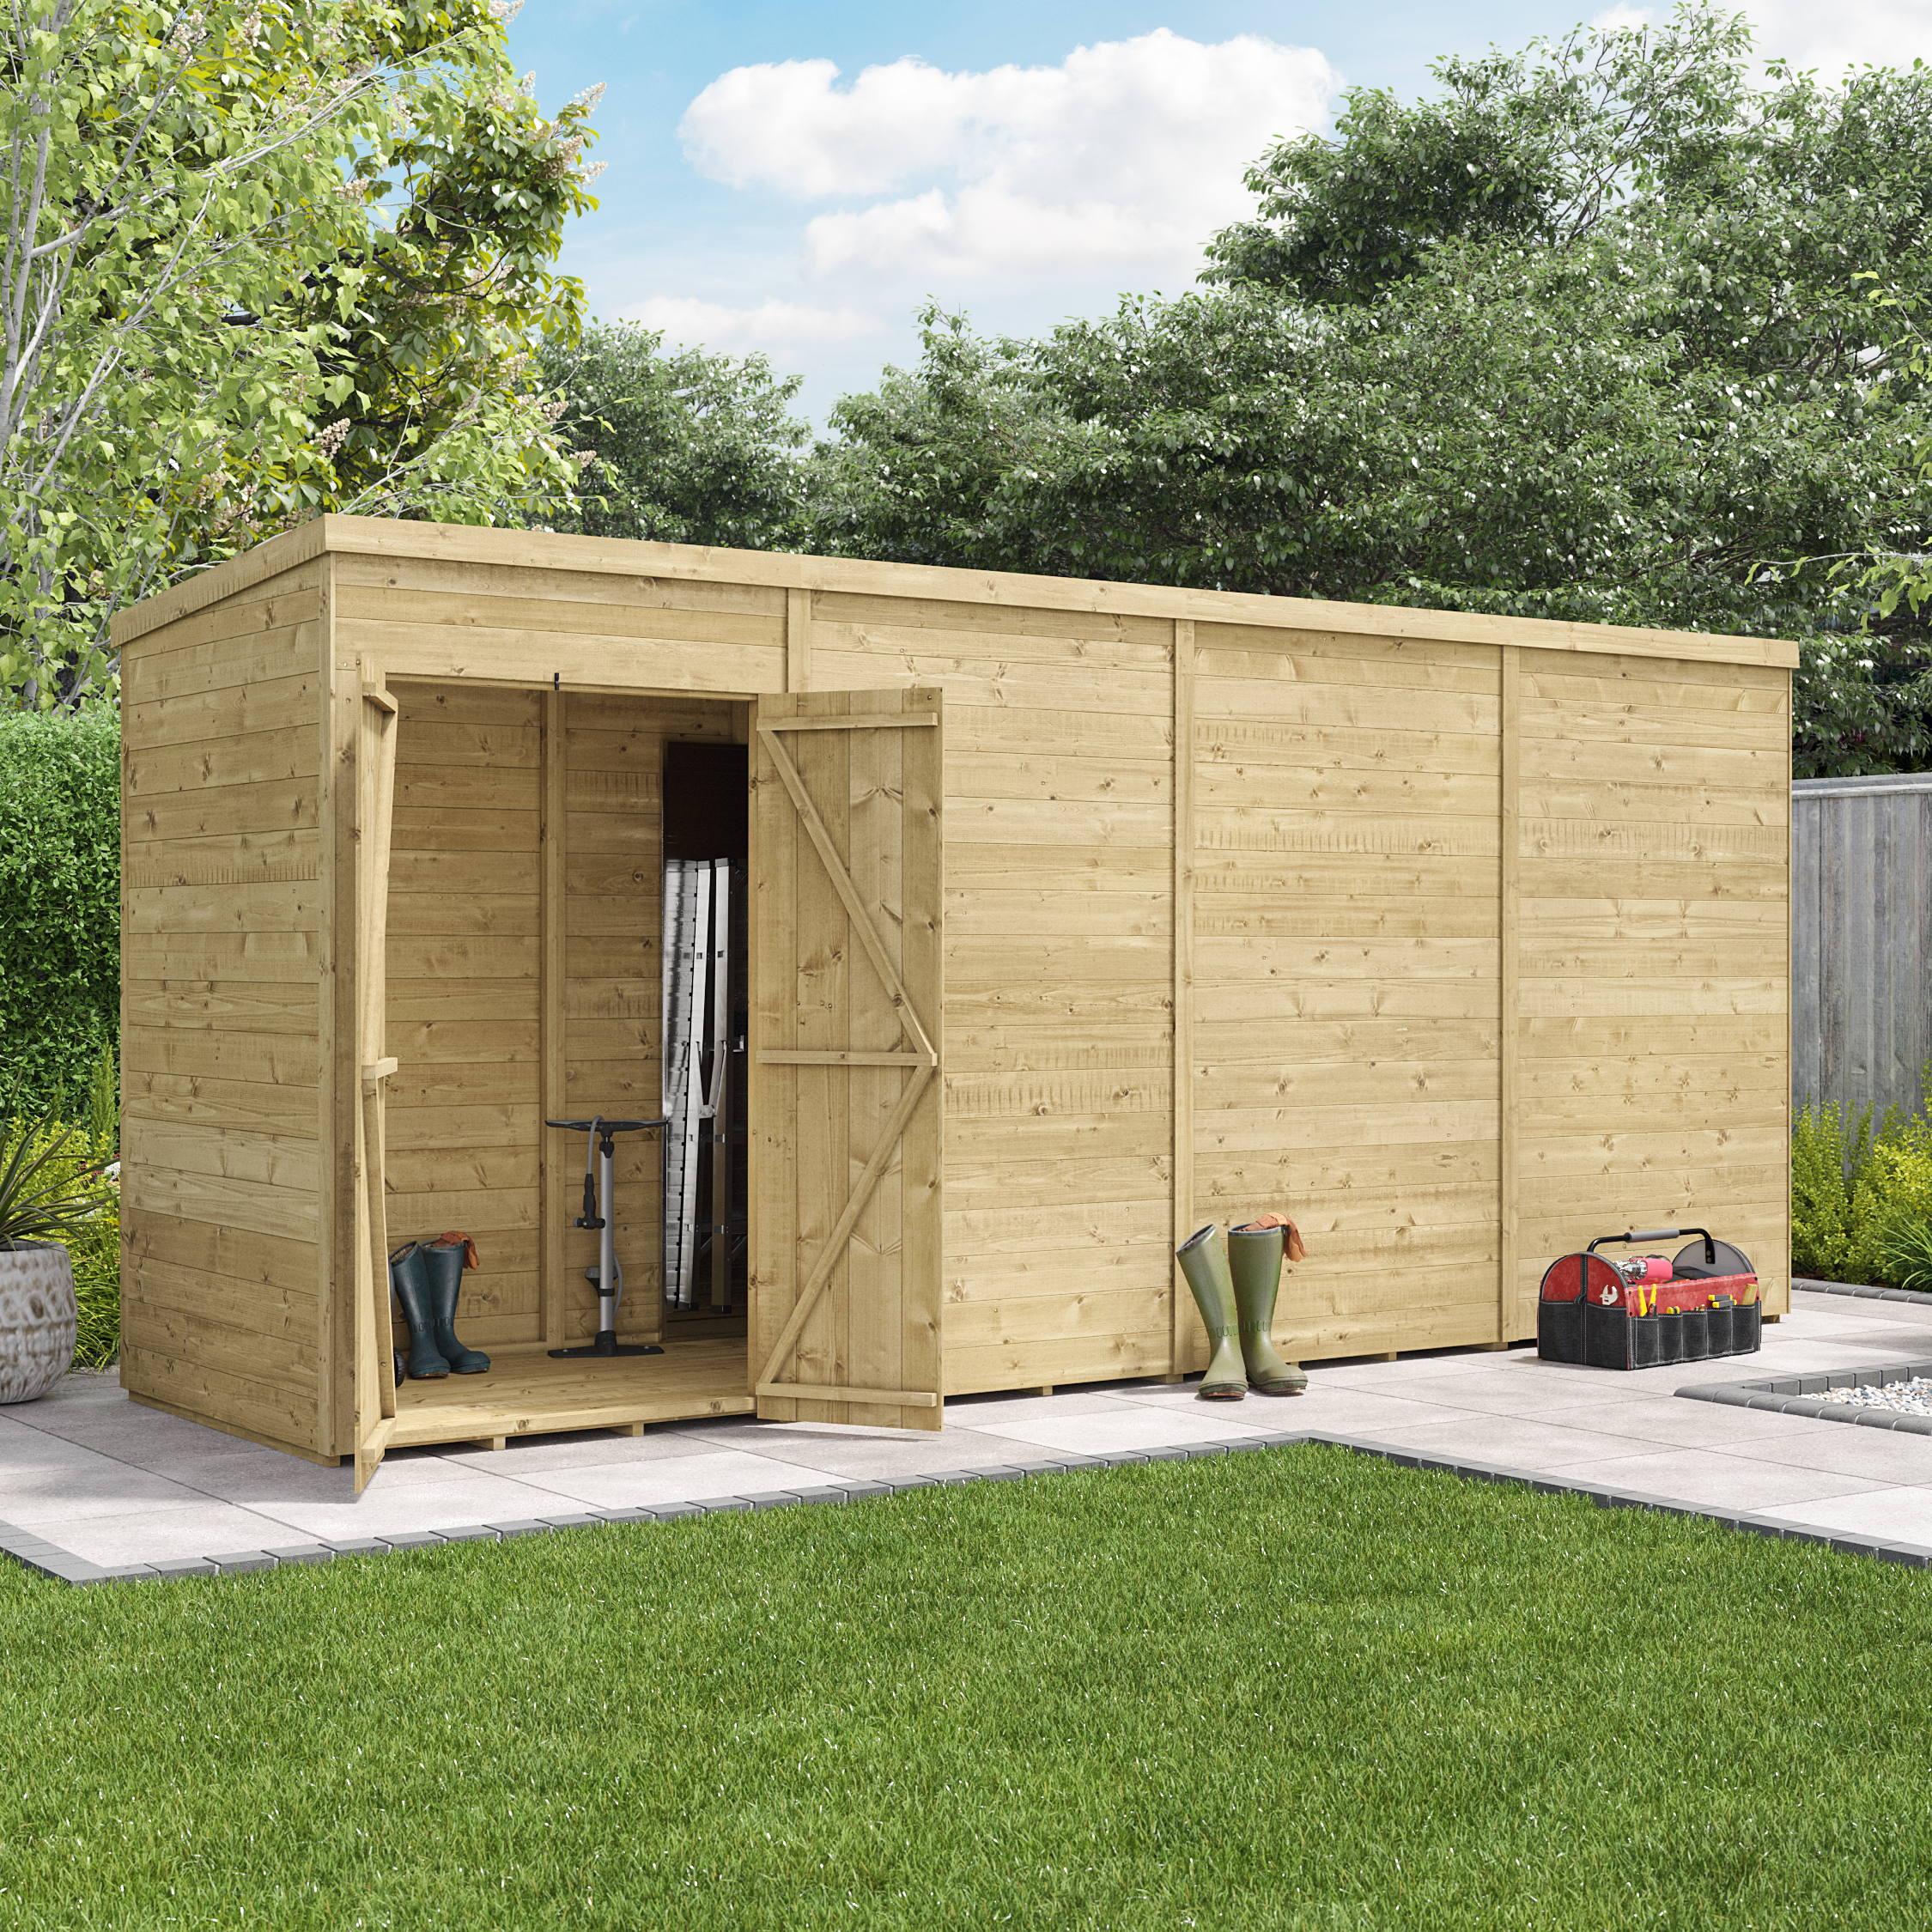 BillyOh Switch Tongue and Groove Pent Wooden Shed - 16x4 Windowless 15mm Garden Shed from BillyOh